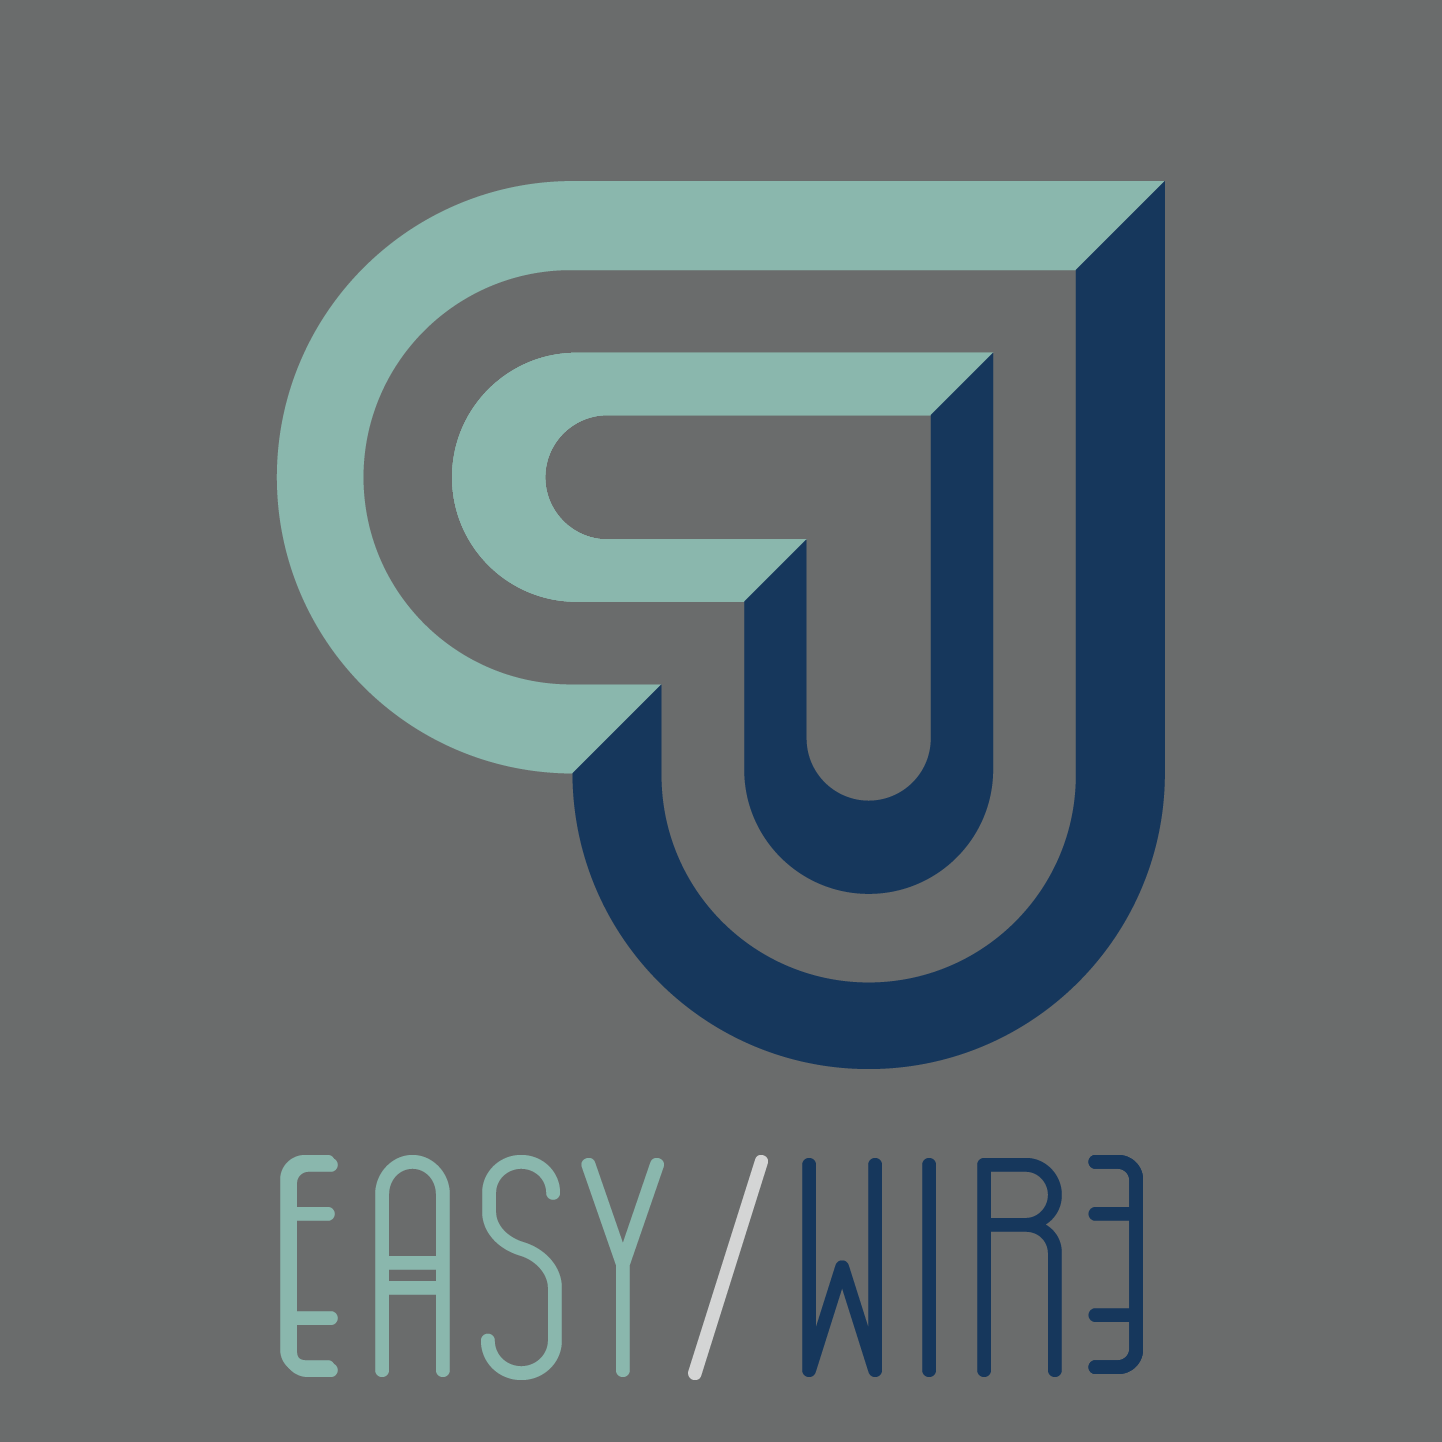 Easywire